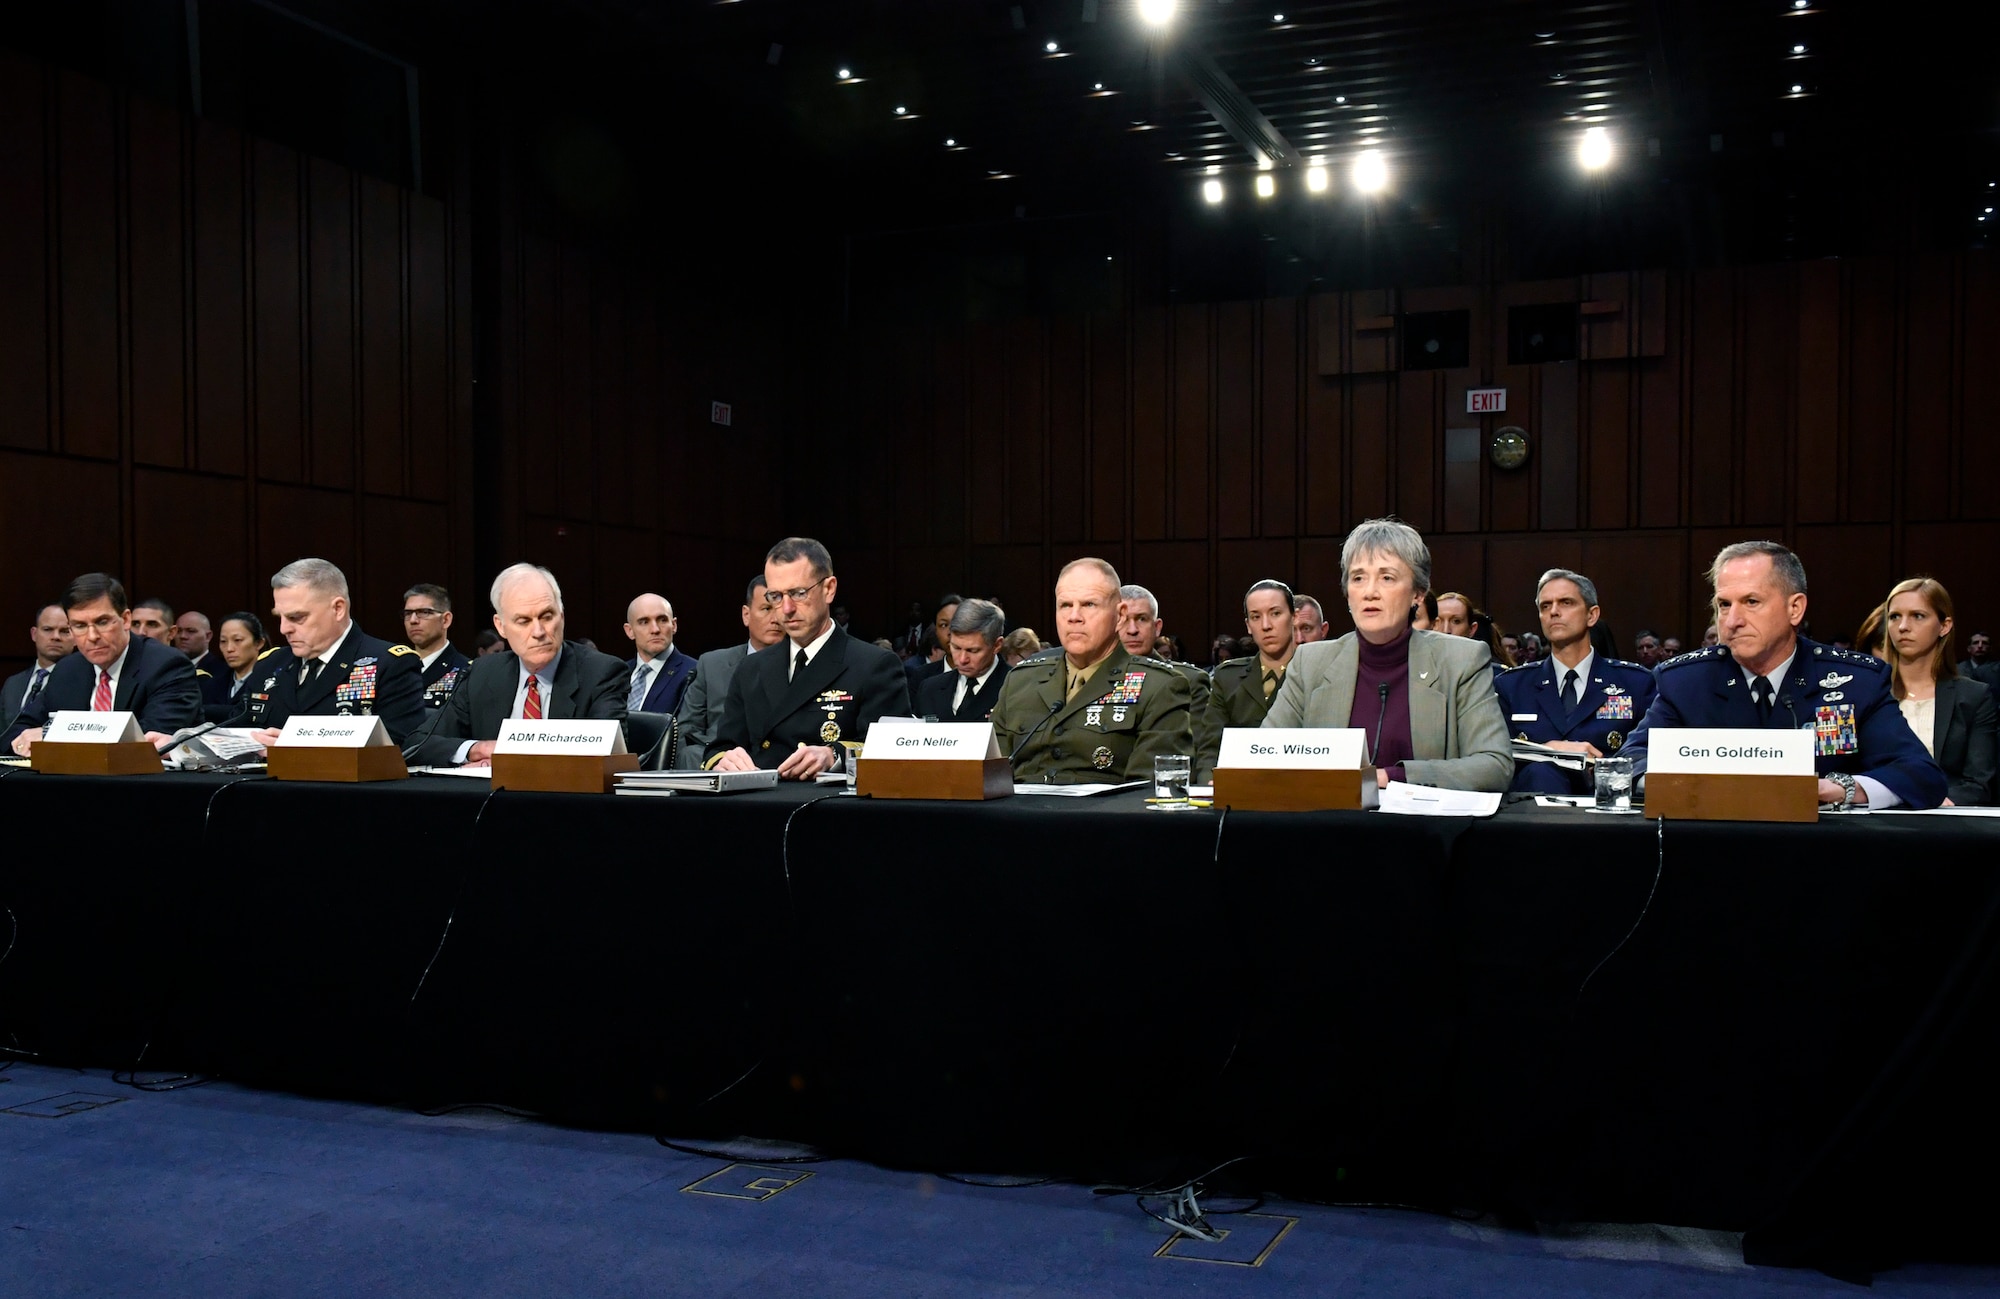 Secretary of the Air Force Heather Wilson provides testimony to the Senate Armed Services Committee in Washington, D.C., March 7, 2019. The committee examined privatized military housing for service members and their families. (U.S. Air Force Photo by Wayne Clark)